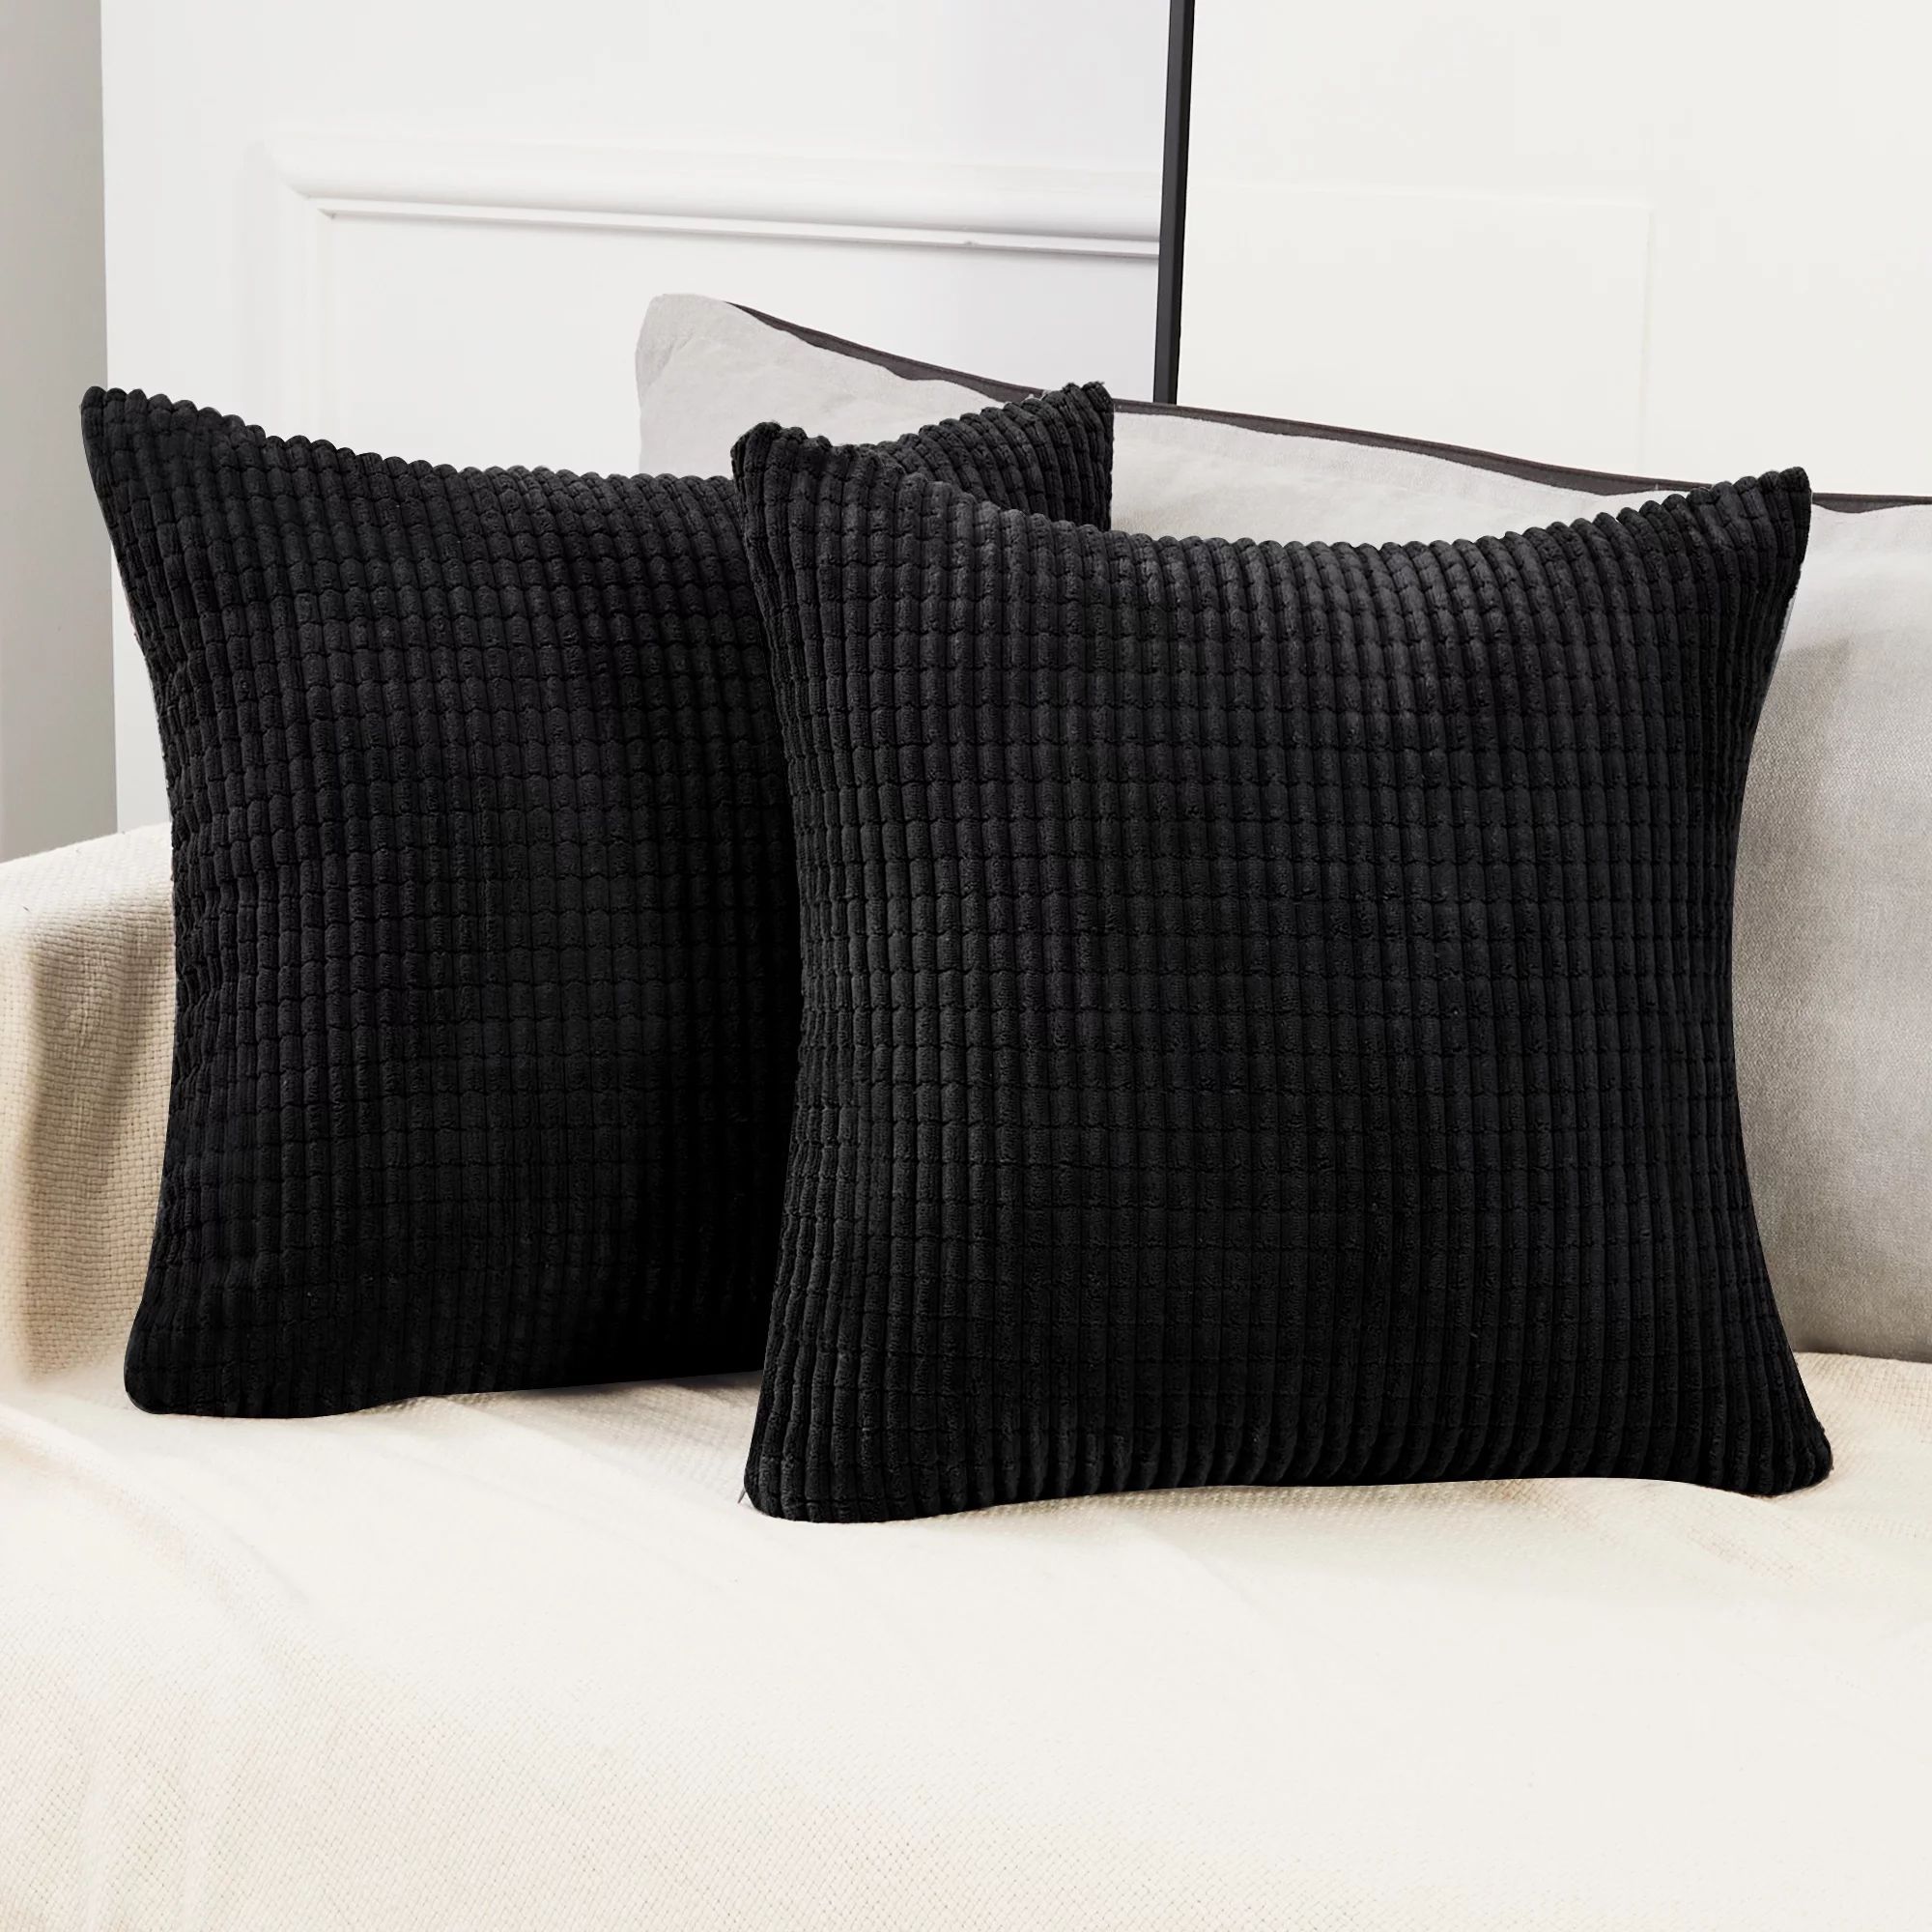 Deconovo Traditional Solid Square Pillow Covers, Black Striped Texture, 16x16 inch, Set of 2. | Walmart (US)